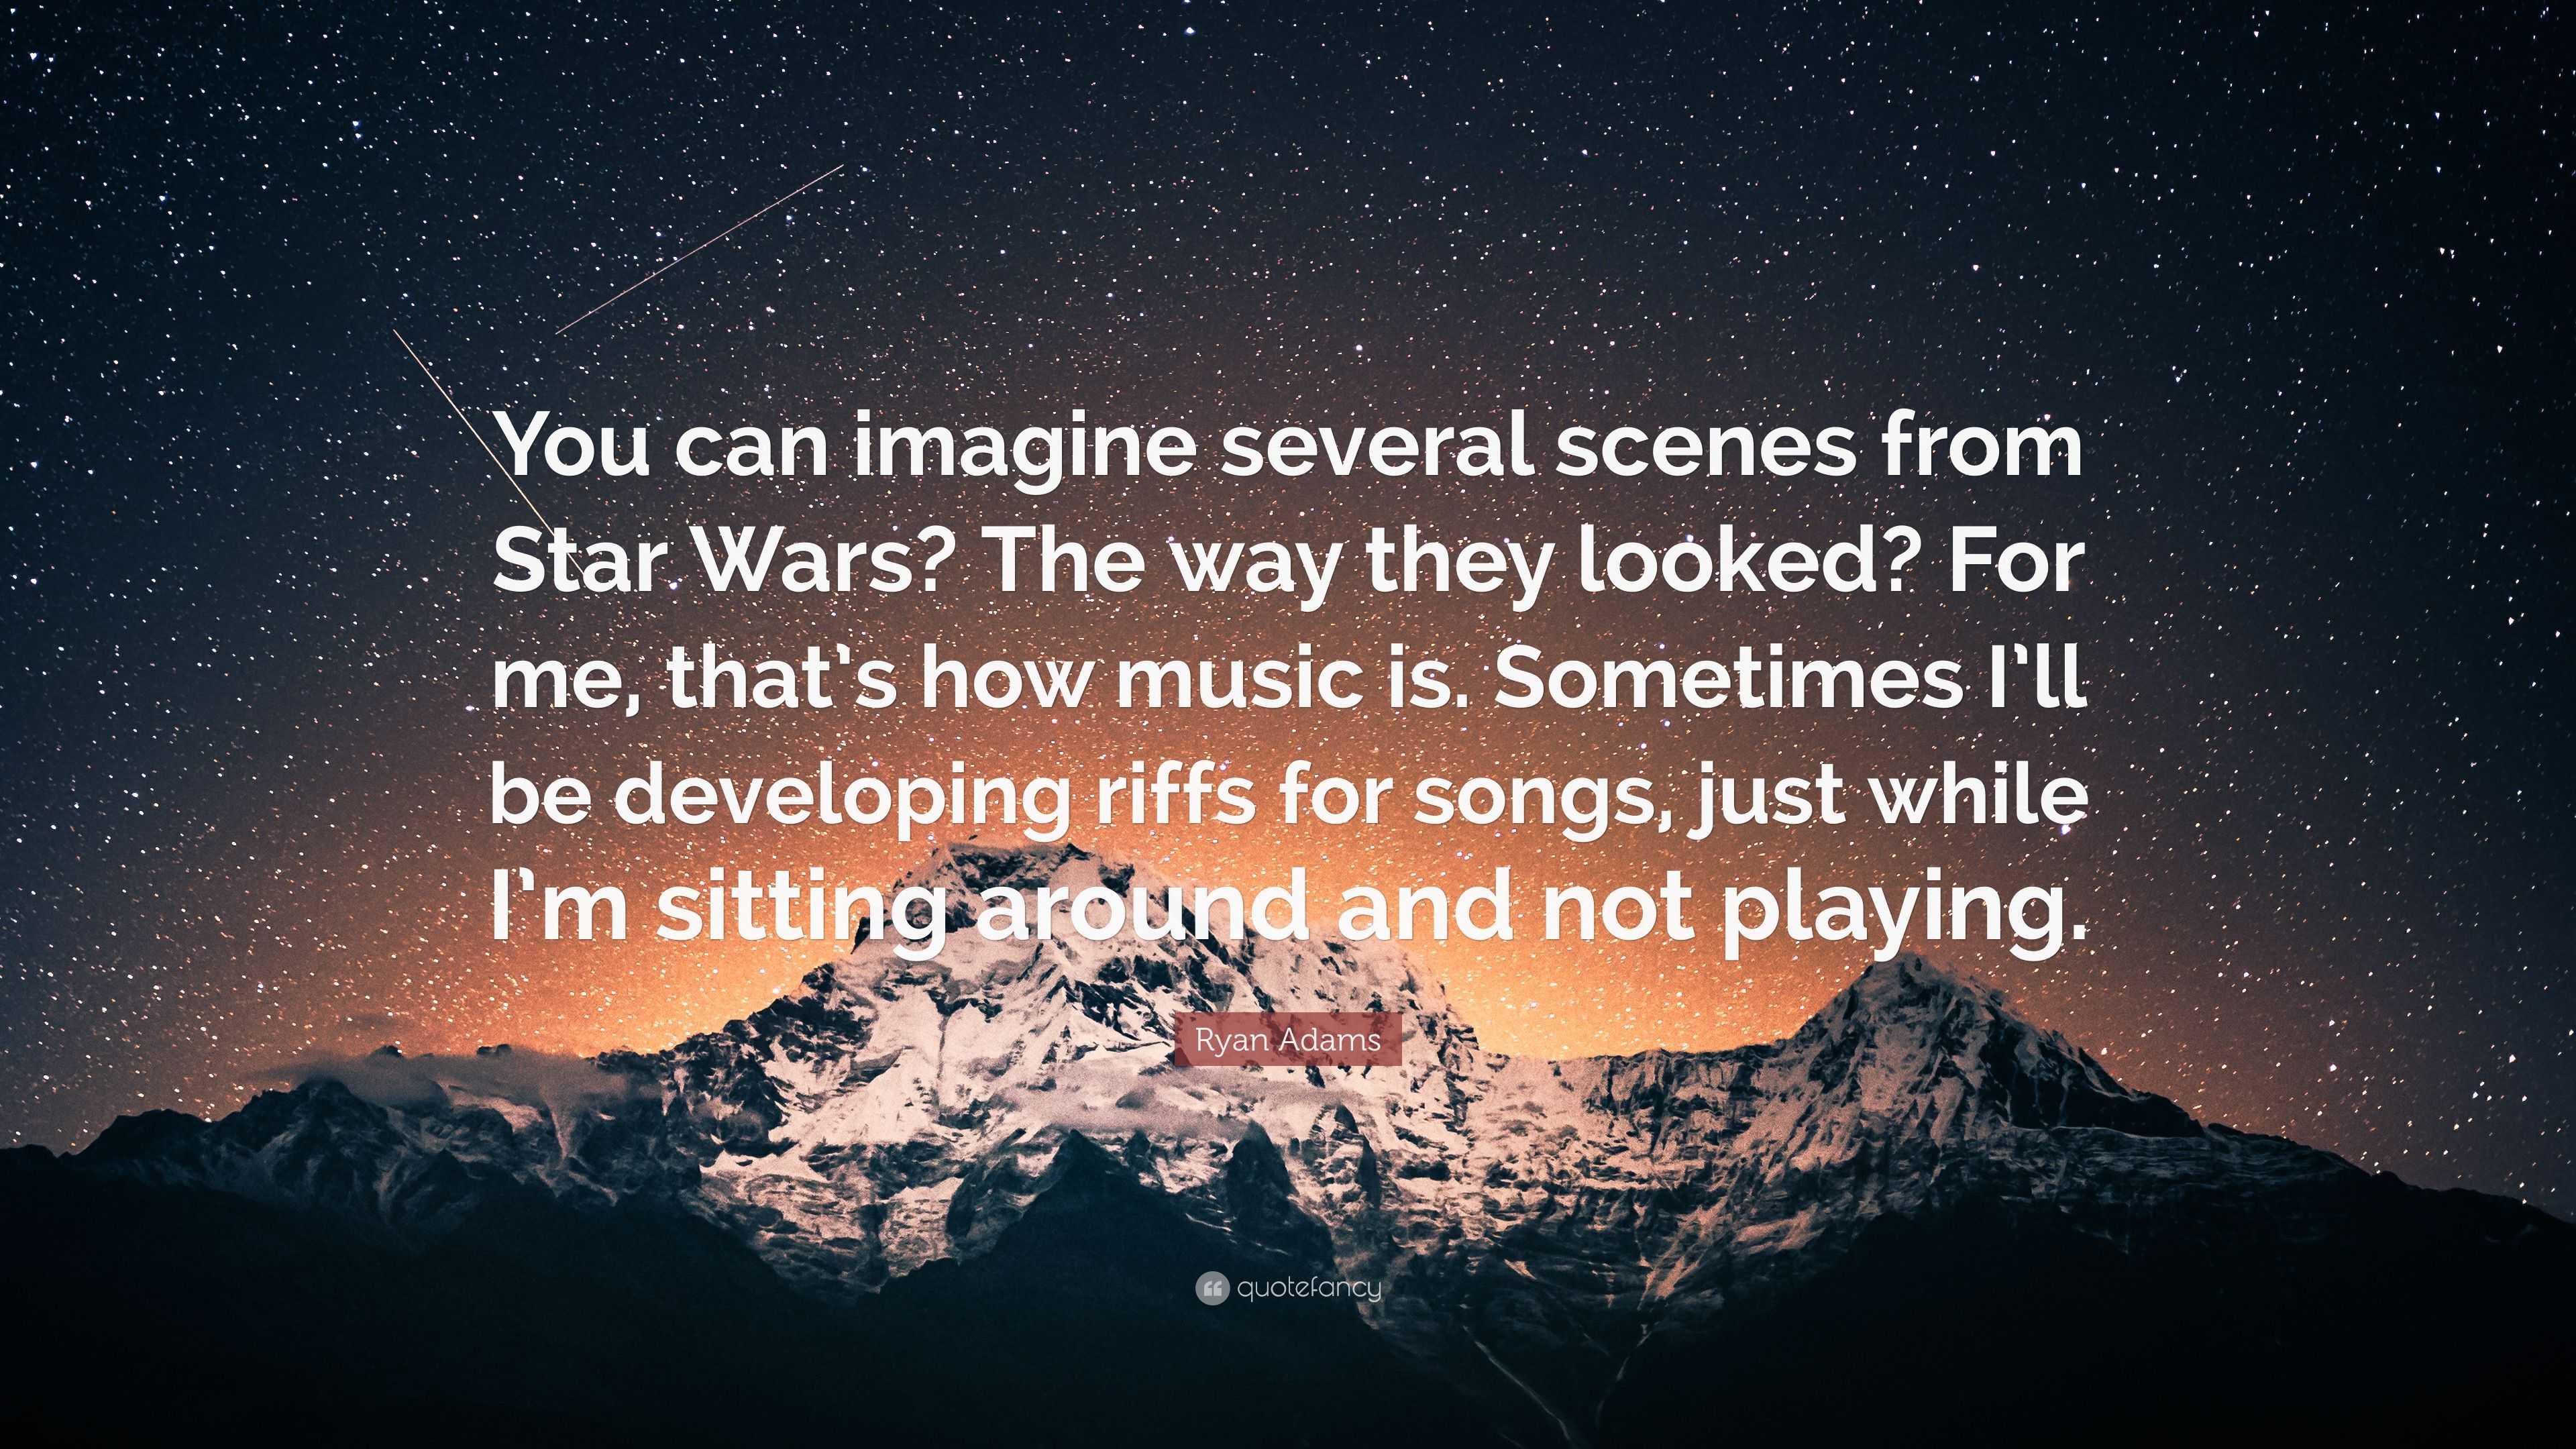 Ryan Adams Quote: “You can imagine several scenes from Star Wars? The way  they looked? For me, that's how music is. Sometimes I'll be devel...”